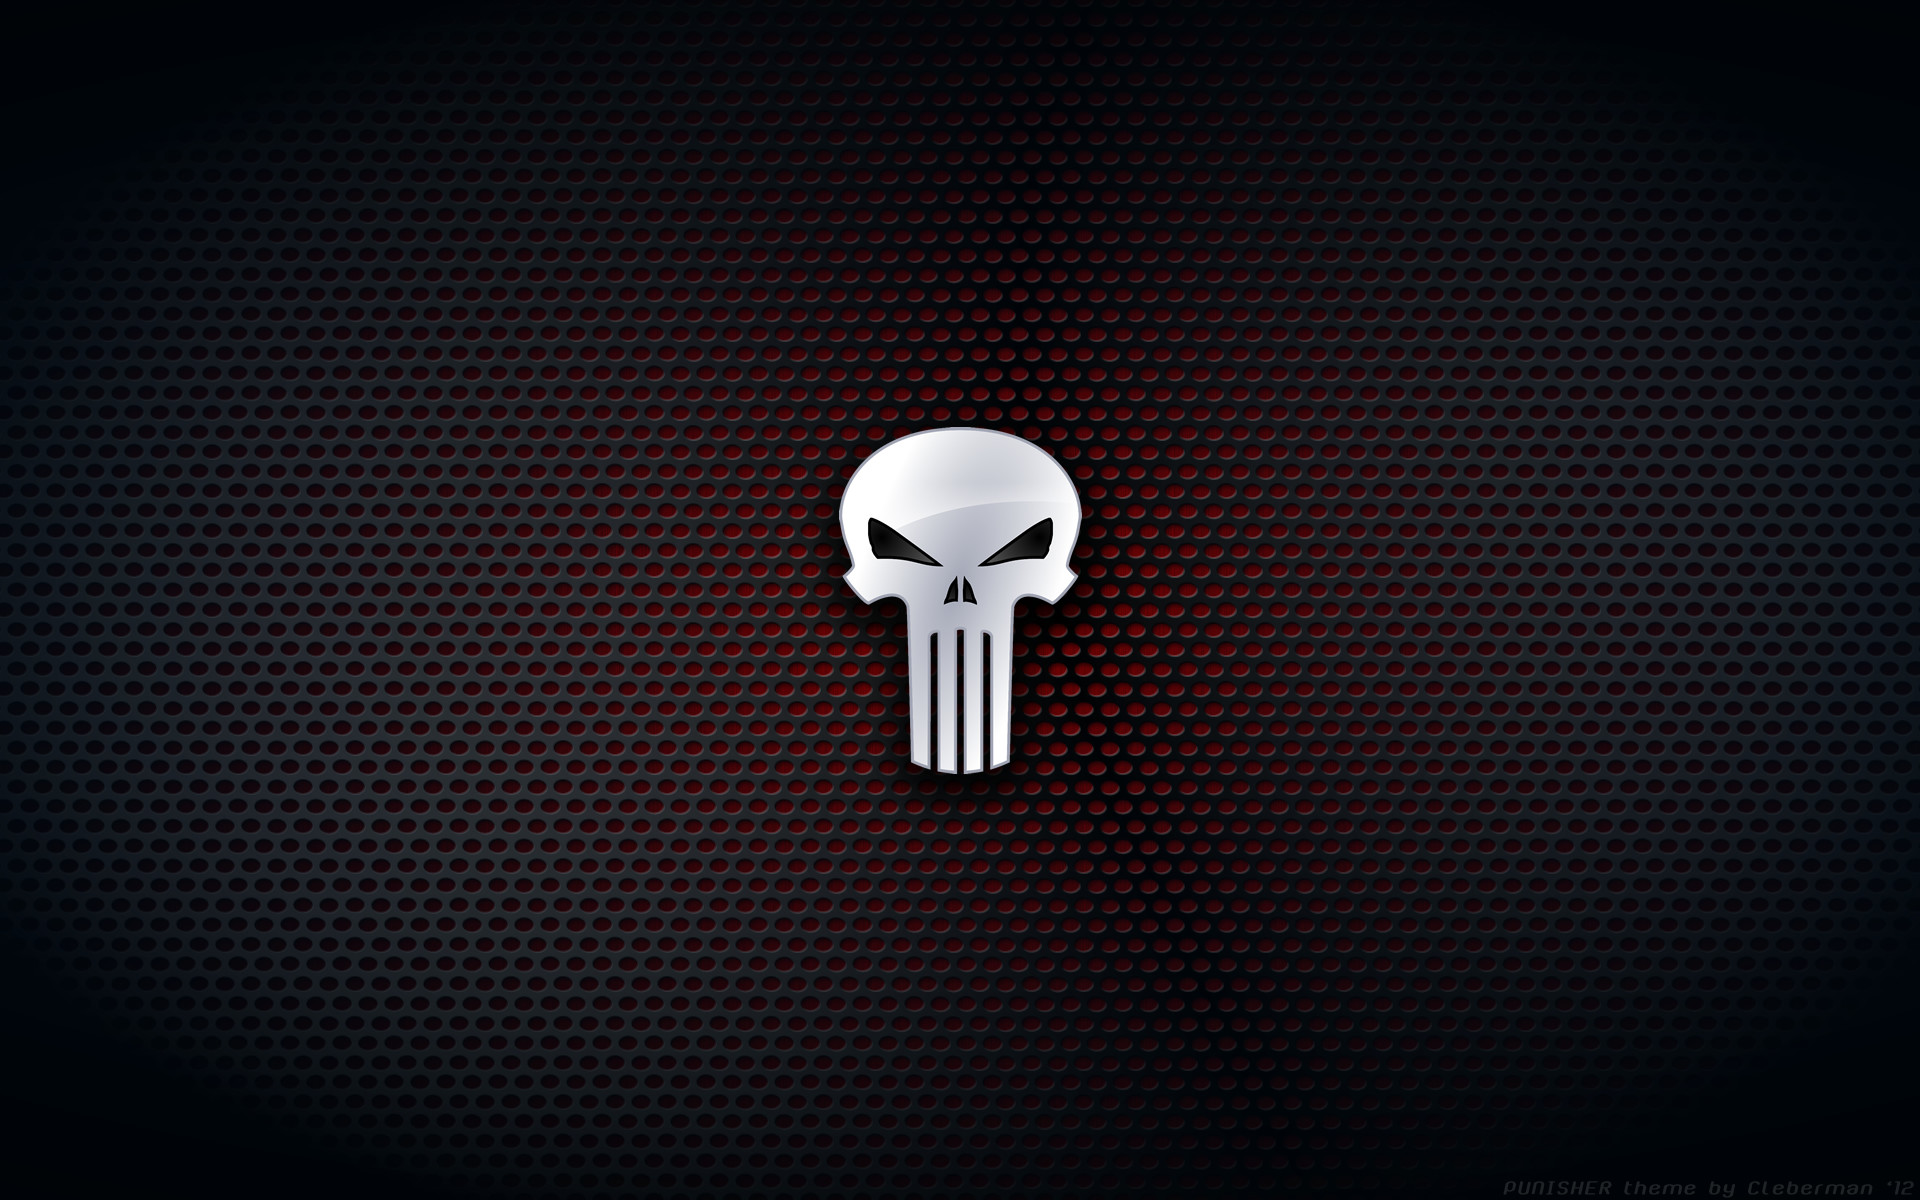 1920x1200 The Punisher Logo Wallpapers Hd Great The Punisher Skull Wallpaper .